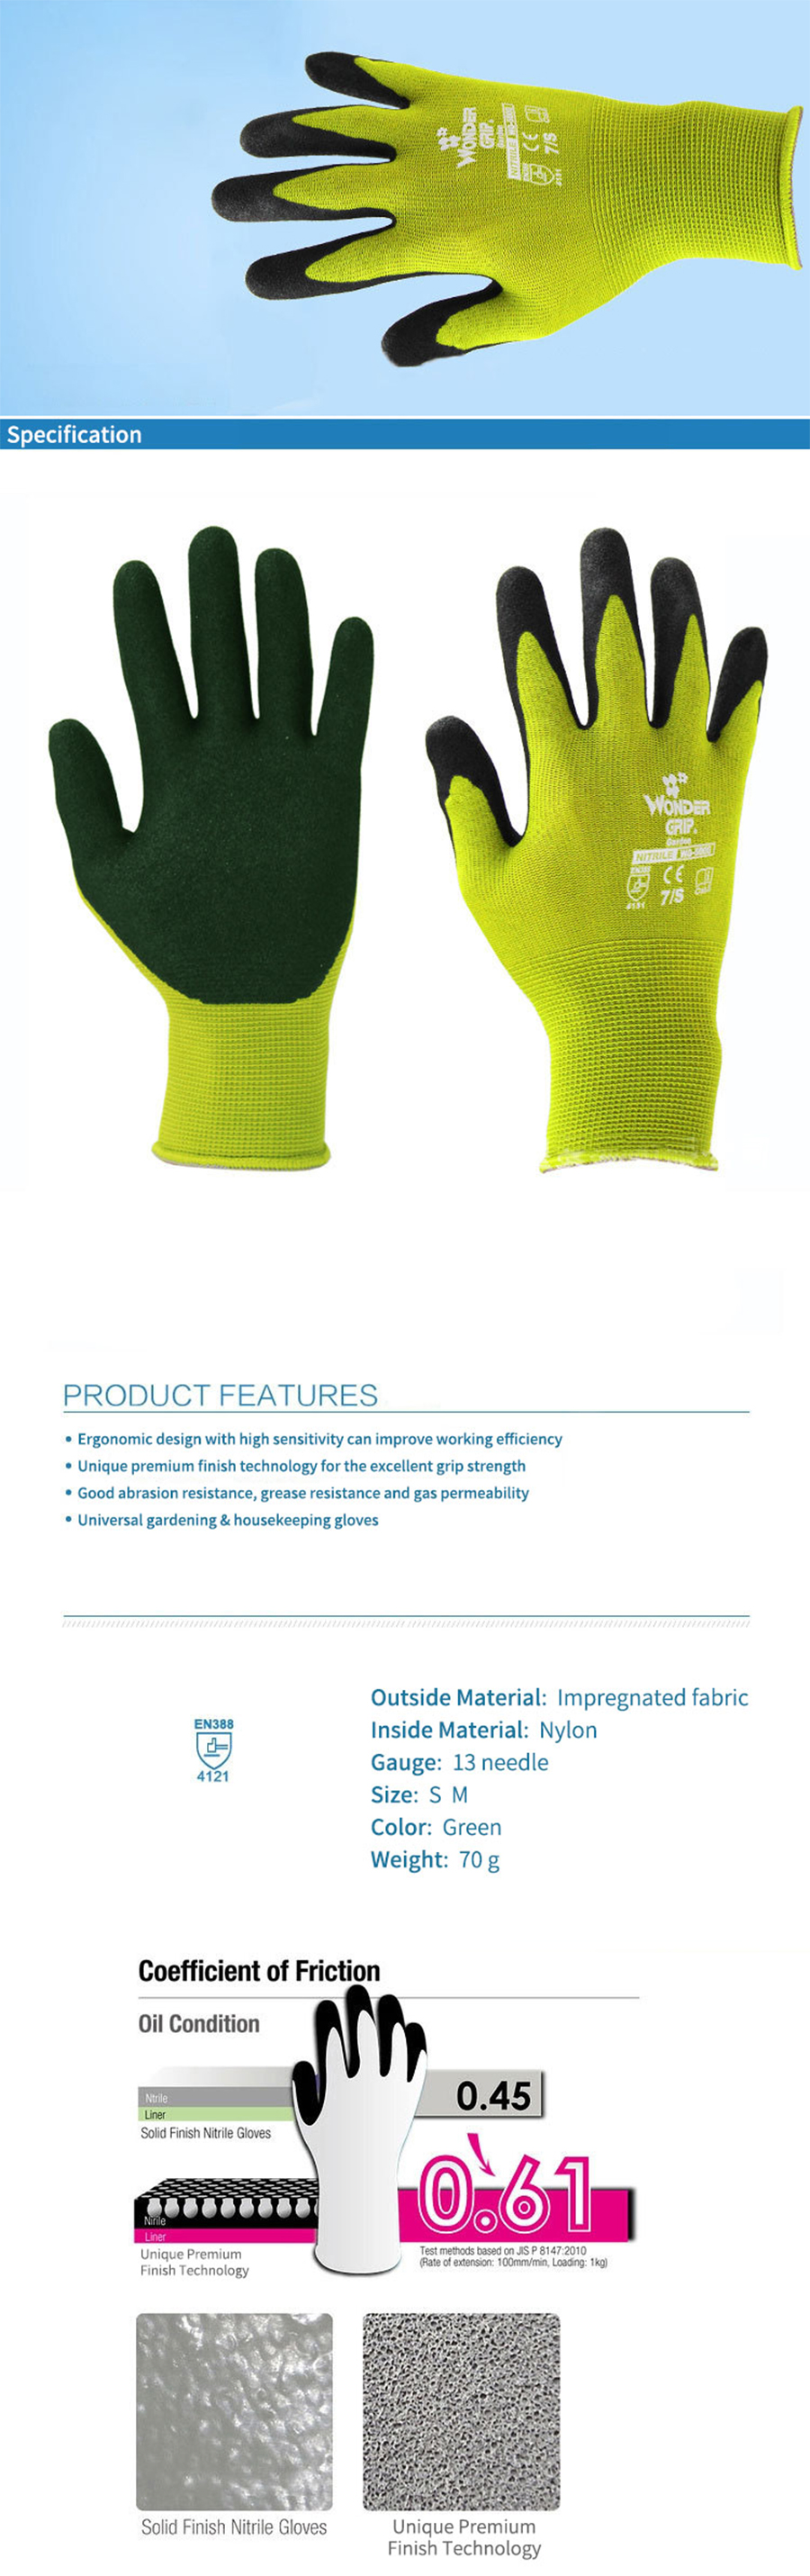 Gardening-Universal-Labour-Protection-Nylon-Glove-1-Pair-Nitrile-Coated-Gloves-Wear-Resistant-1281580